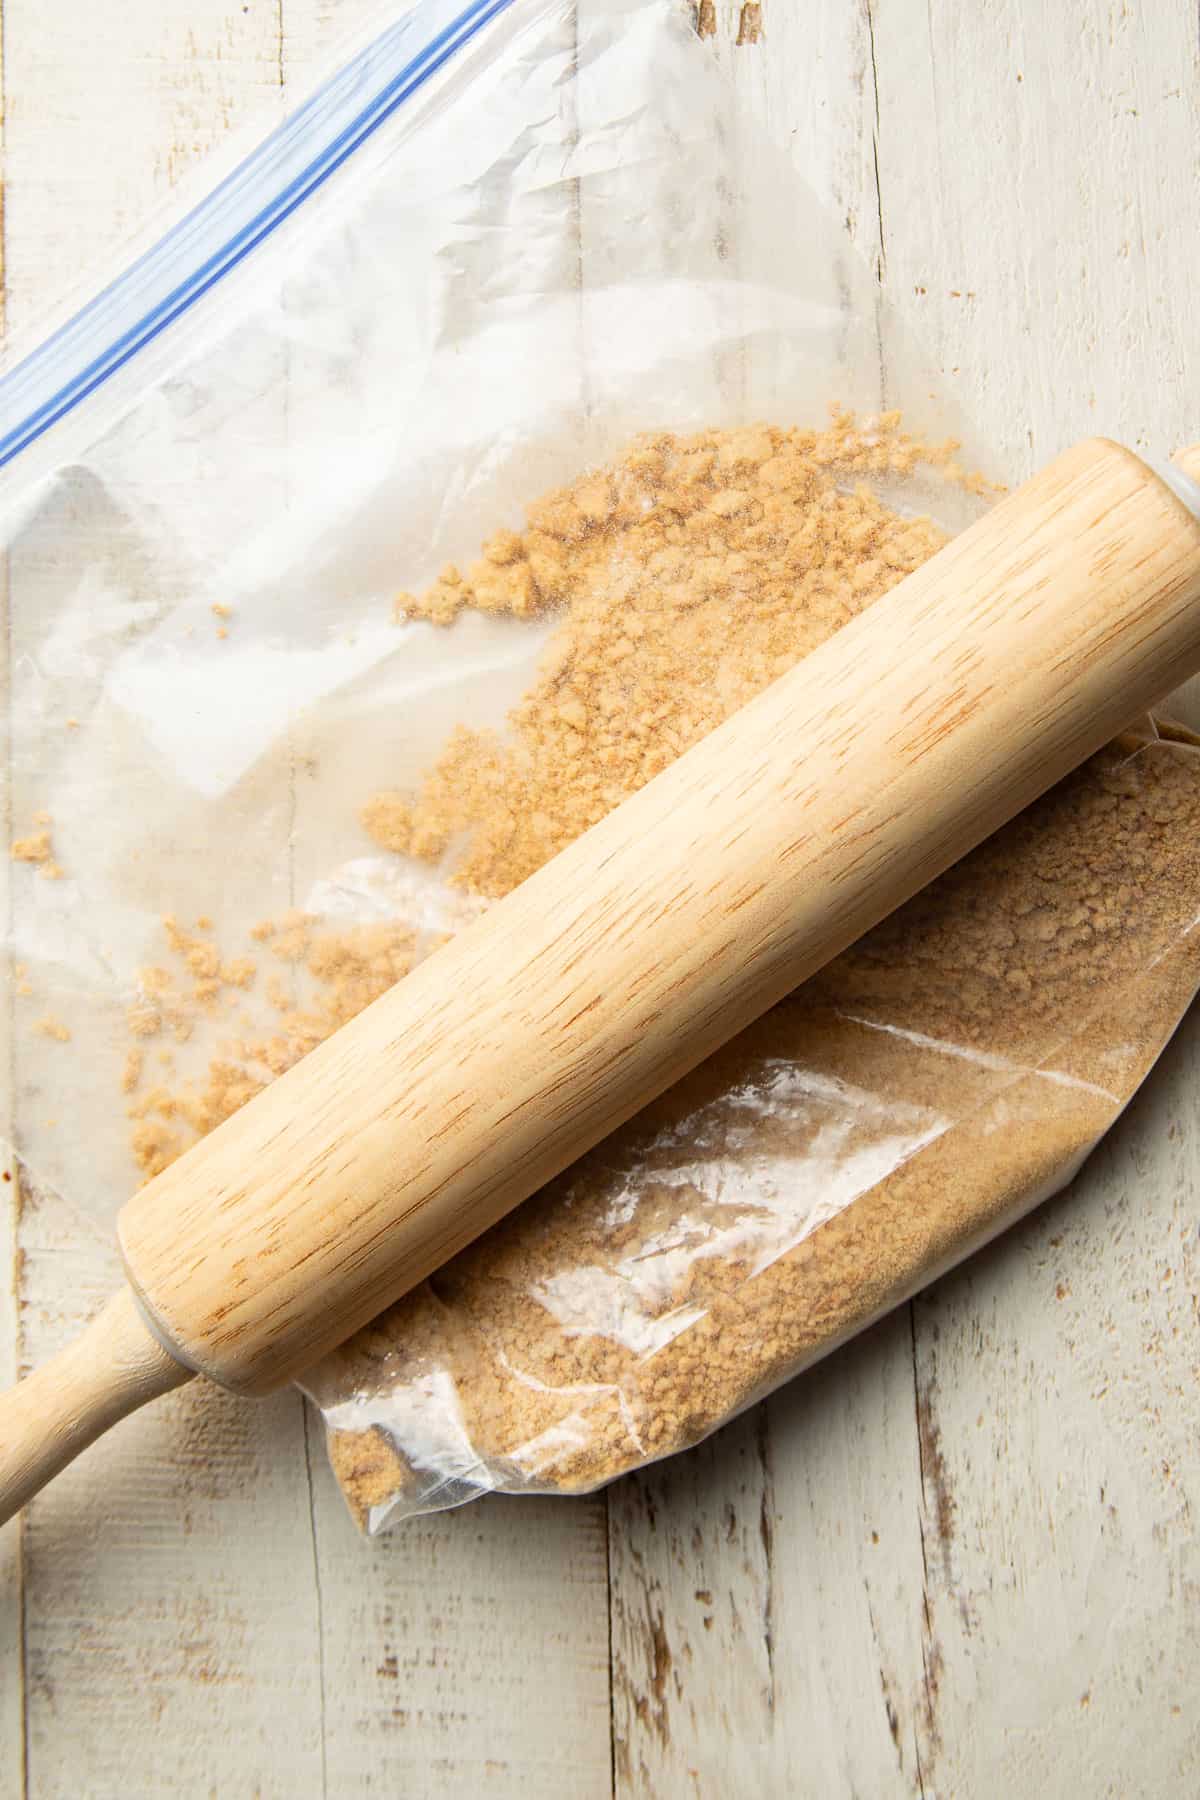 Graham cracker crumbs in a sealed bag with a a rolling pin on top.